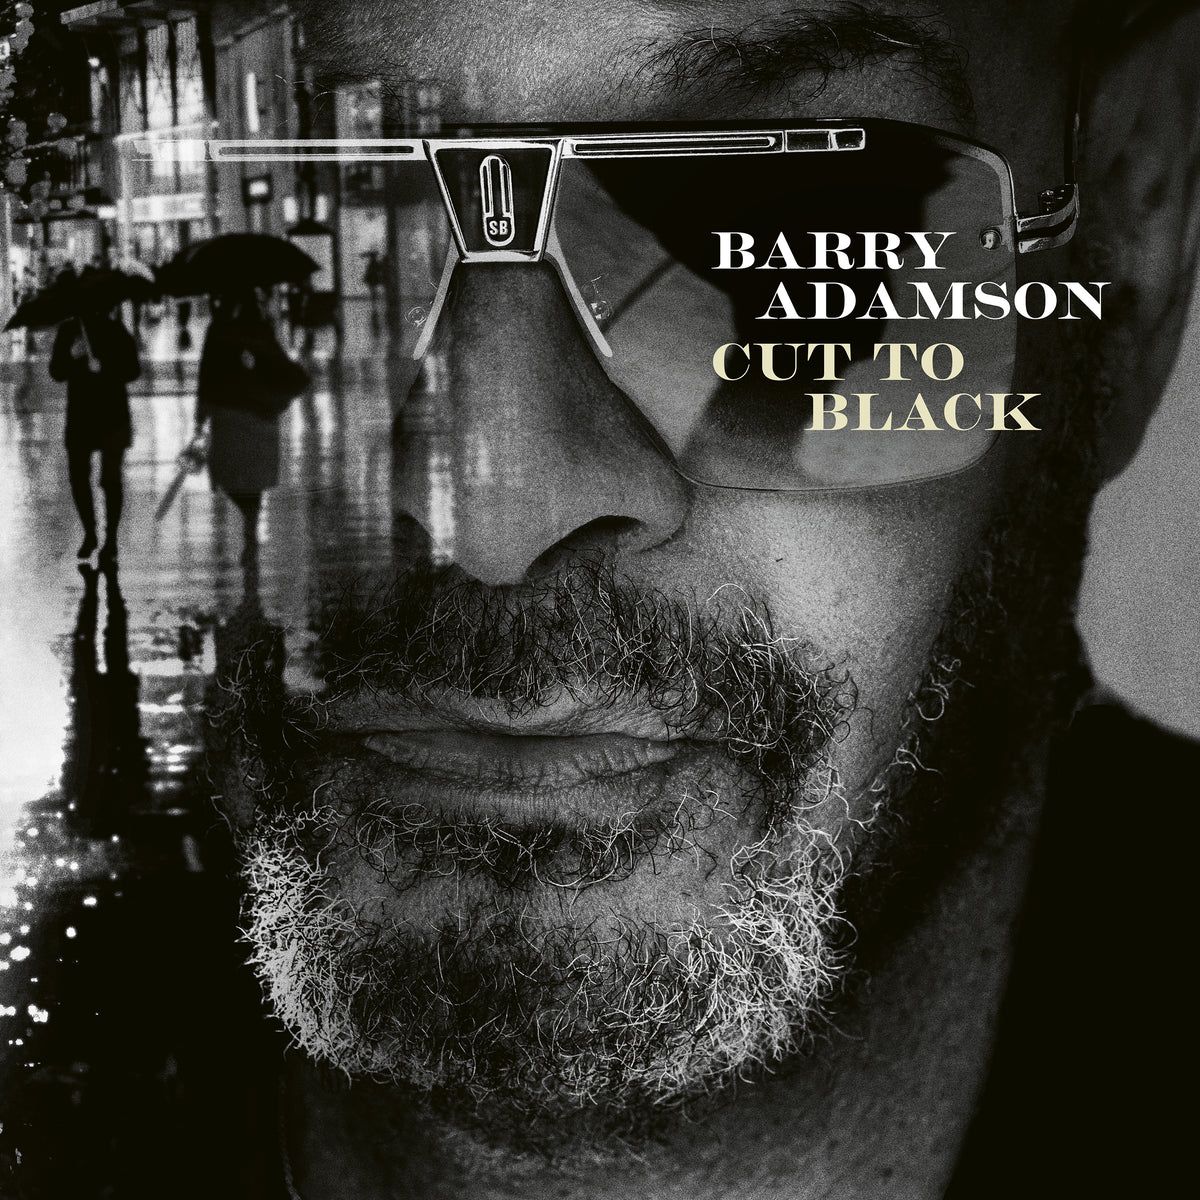 WIN To mark the release of the new album by @AdamsonBarry We’re offering the chance to win 2 tickets for the show @CornHertford on May 25 w/ special guest @nadine_khouri + signed vinyl copy of Cut To Black! Like & share to be in with a chance! ➡️ buff.ly/49vT7Ny ⬅️